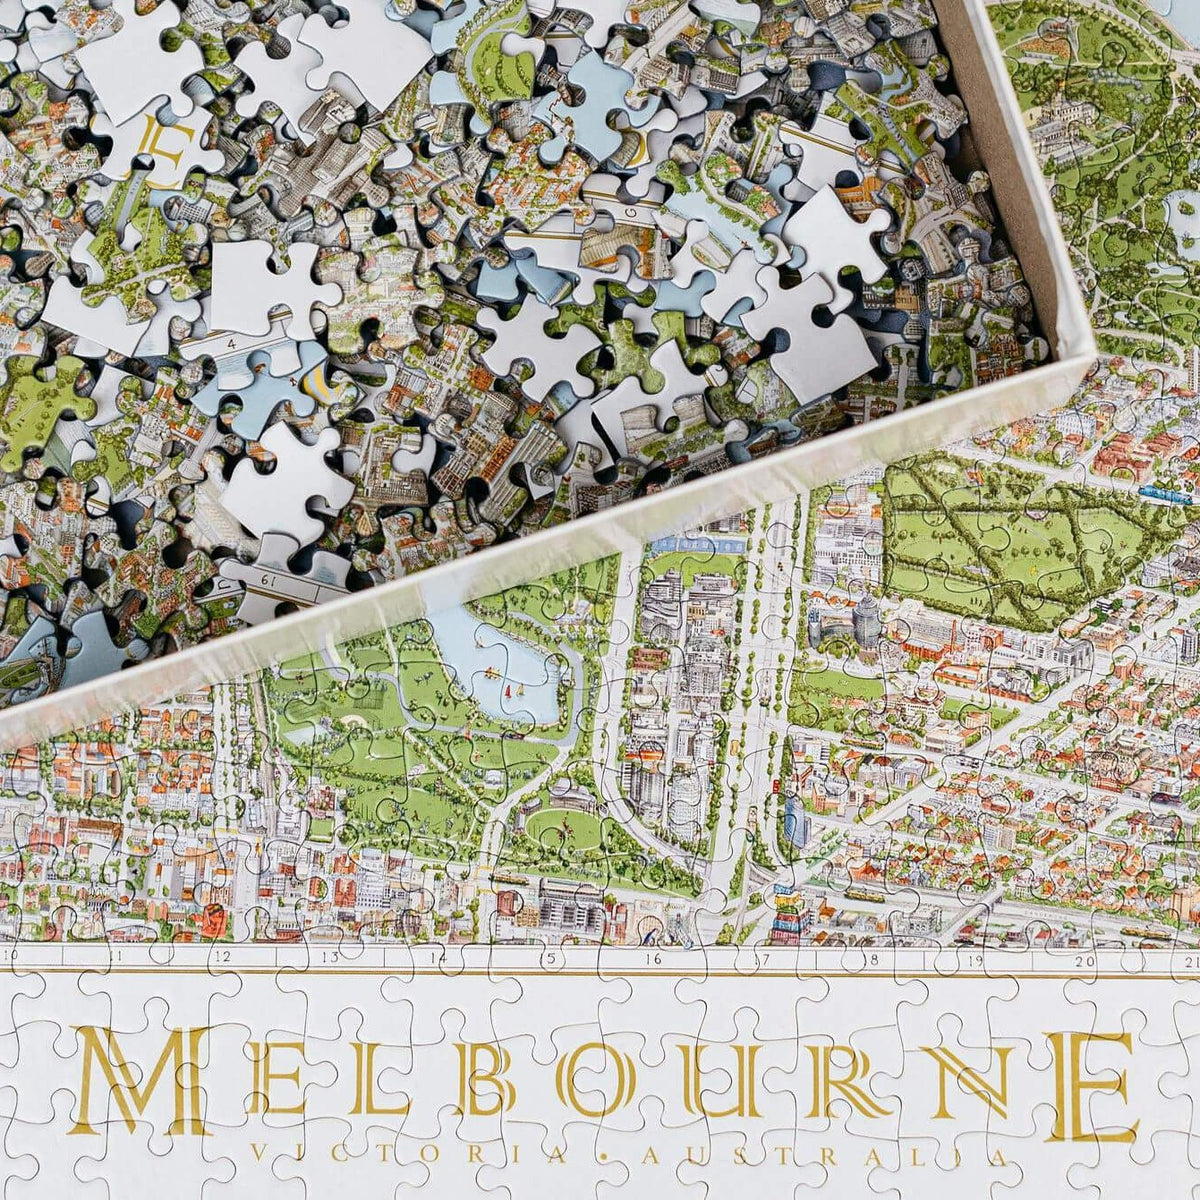 The Melbourne Map 1,000-piece jigsaw puzzle. The image shows a close up of the &quot;Melbourne&quot; name title and the surrounding detail and in the top left corner is the open box with loose pieces.